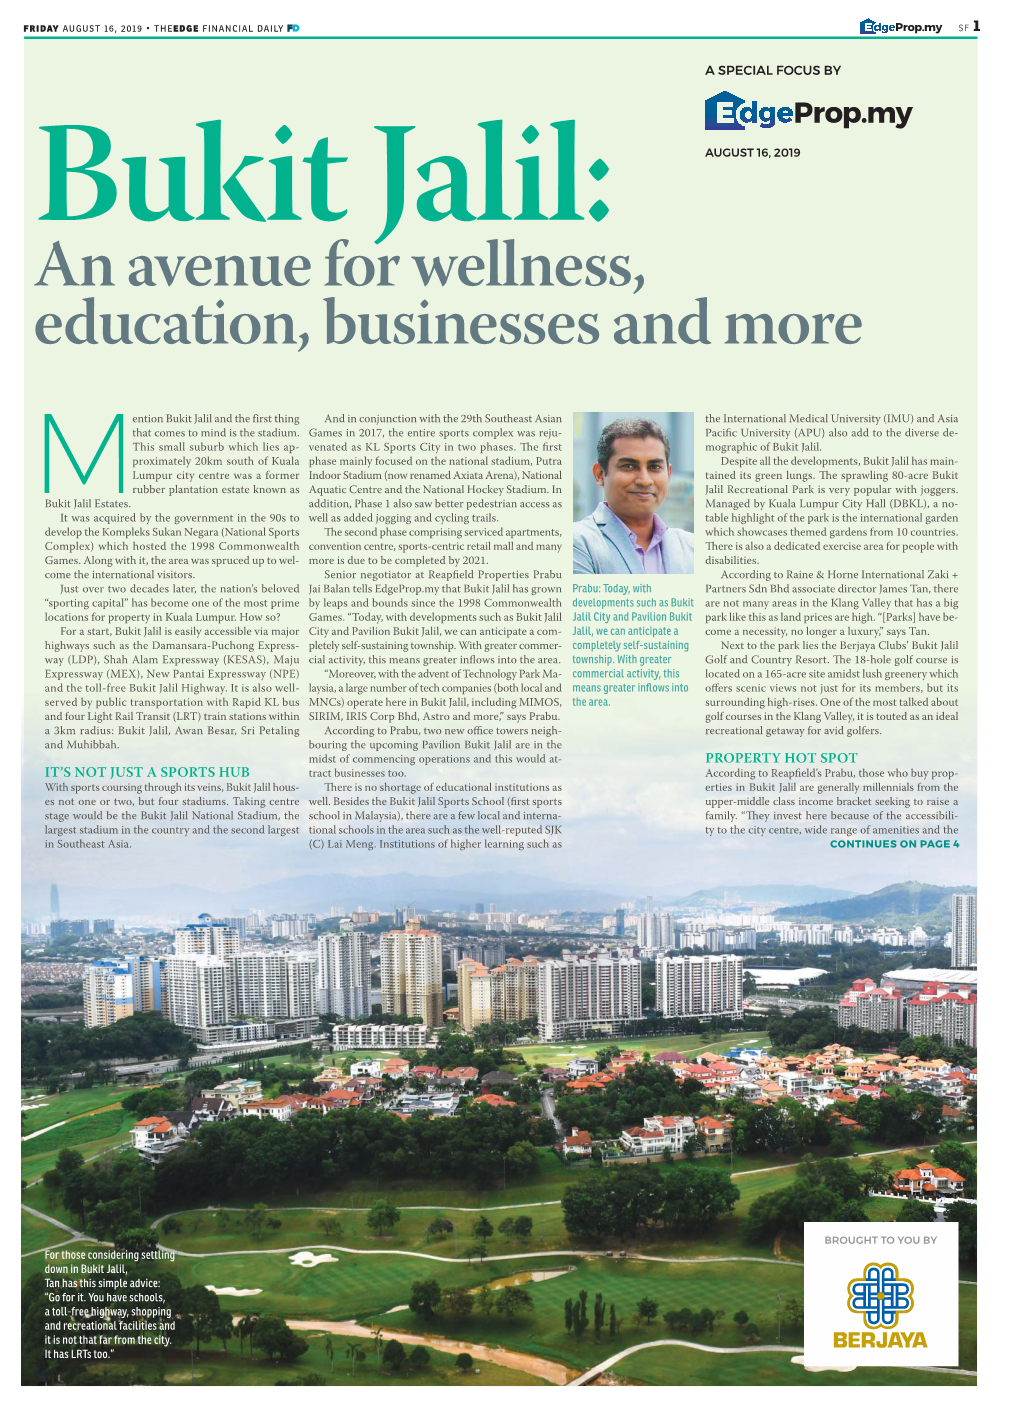 SPECIAL FOCUS by Bukit Jalil: AUGUST 16, 2019 an Avenue for Wellness, Education, Businesses and More